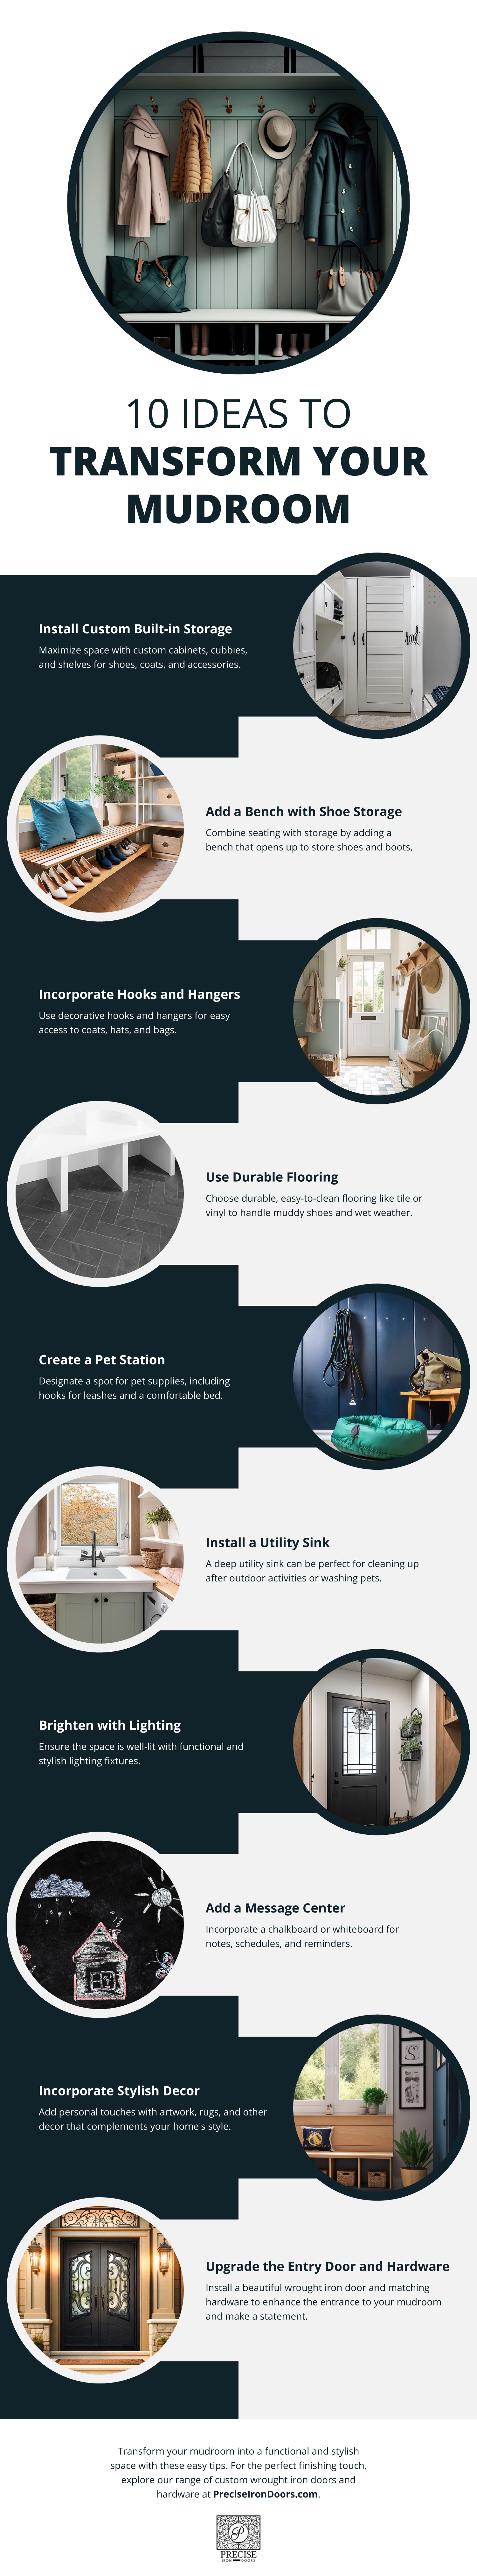 Ideas to Transform Your Mudroom Infographic